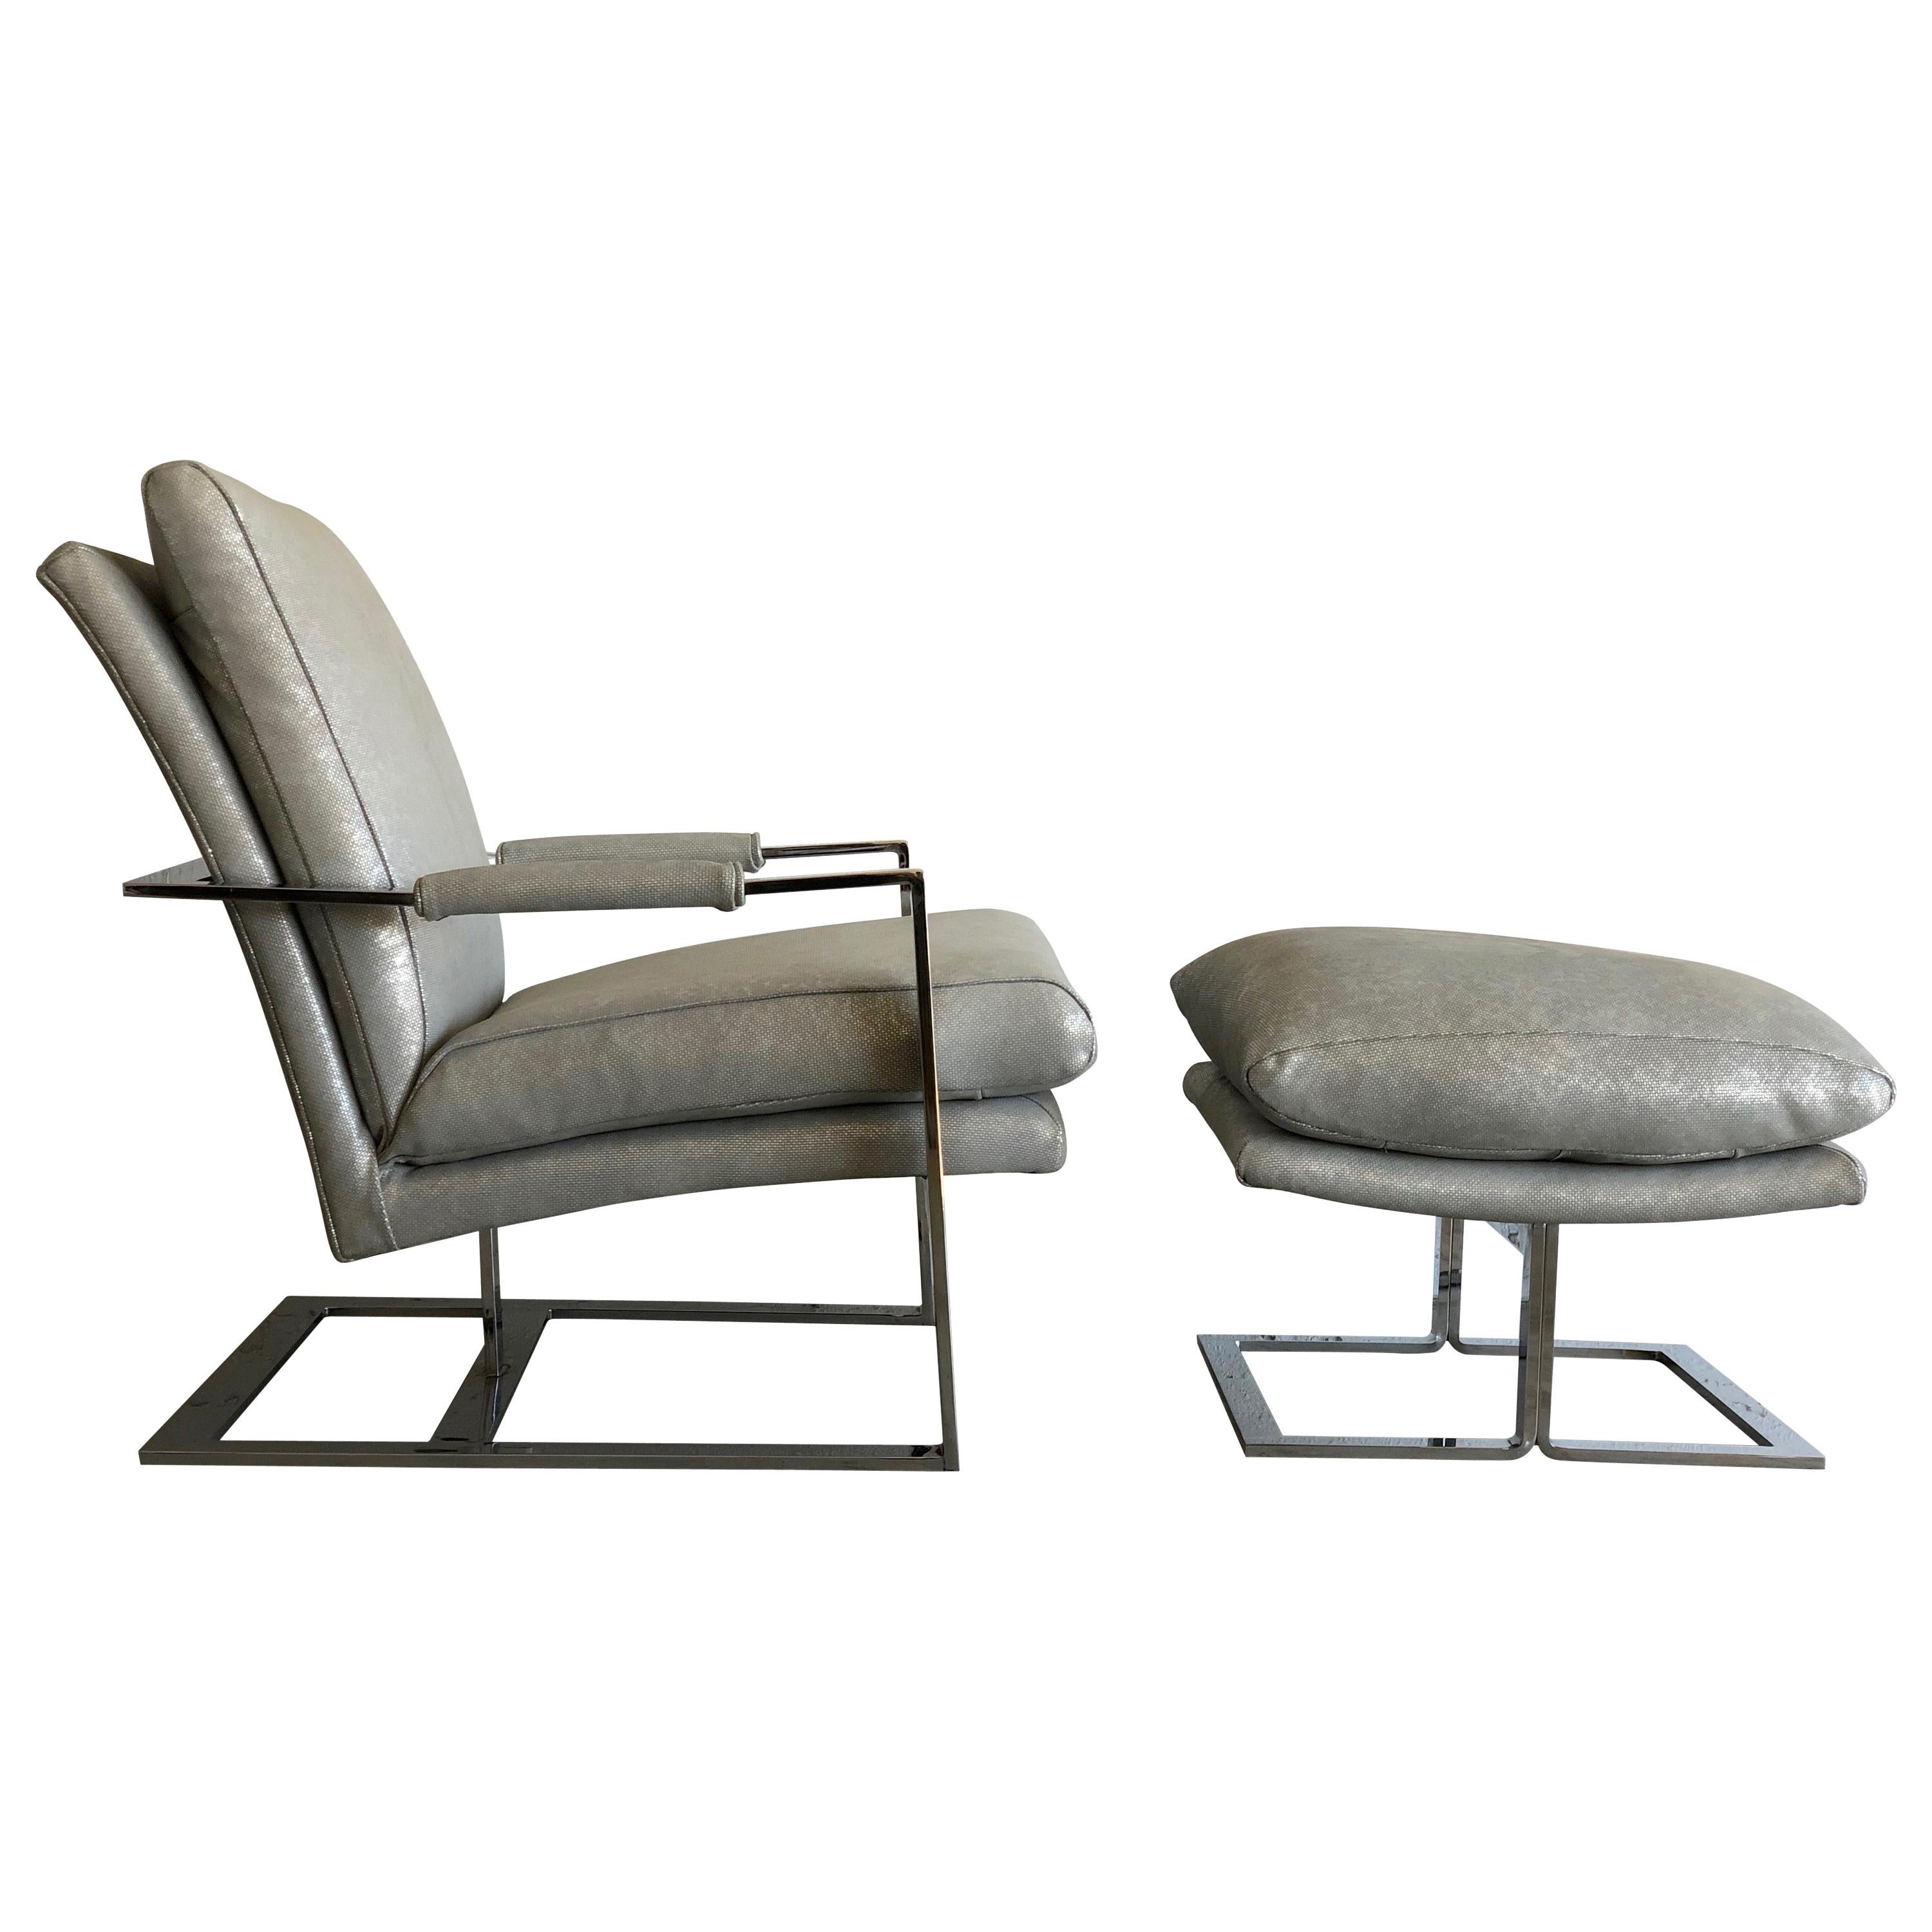 Chrome Flat Bar 1970s Lounge Chair and Ottoman in Silver Grey Metallic Leather For Sale